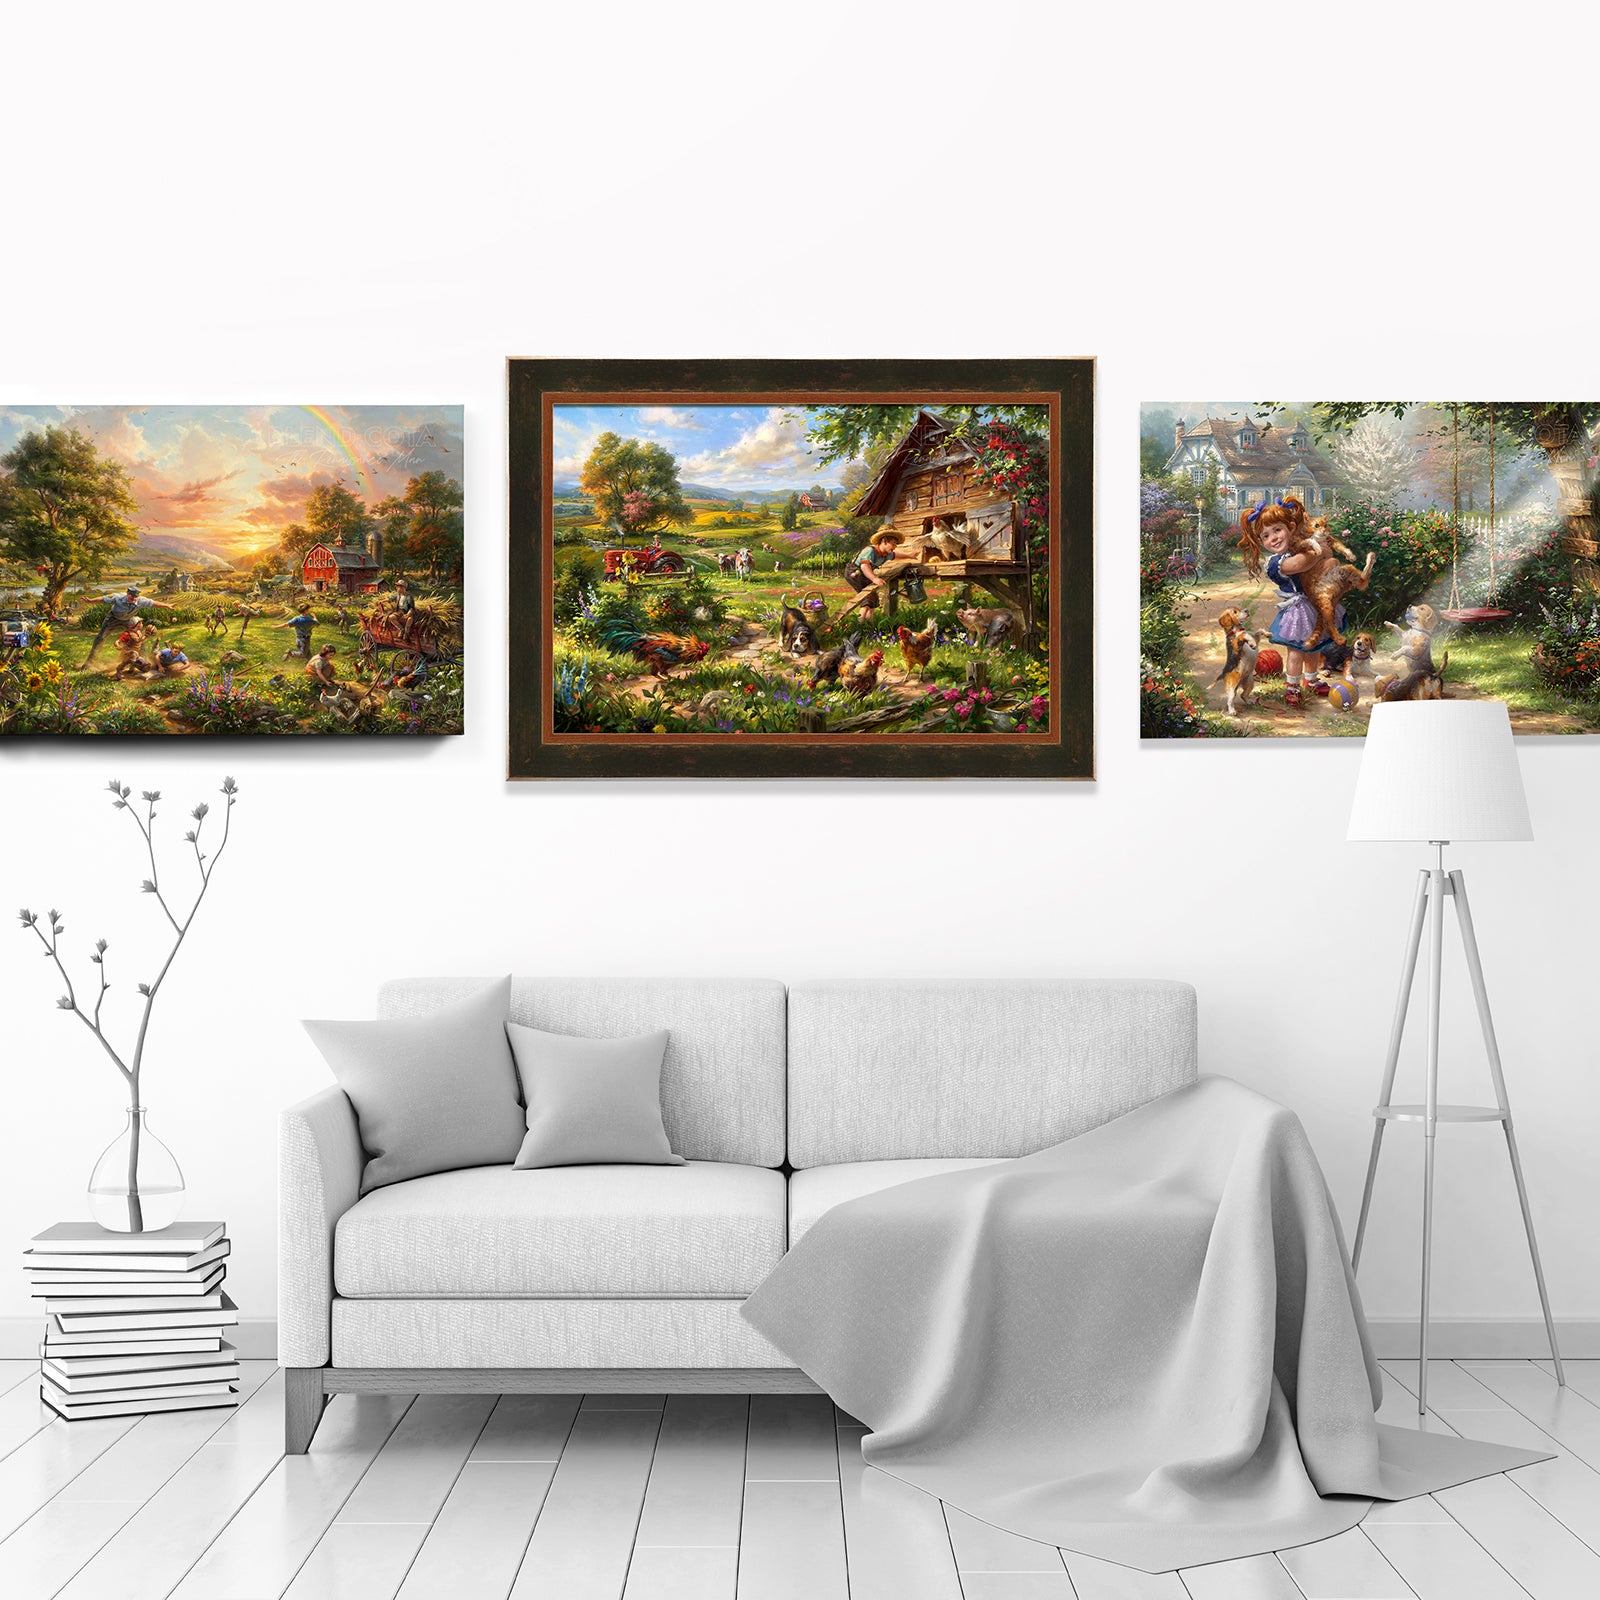 limited edition versions of the paintings, embellished by hand and limited available showcase renaissance revival images paintings and art pieces in a room setting - Blend Cota original oil painting - renaissance revival - blend cota studios art